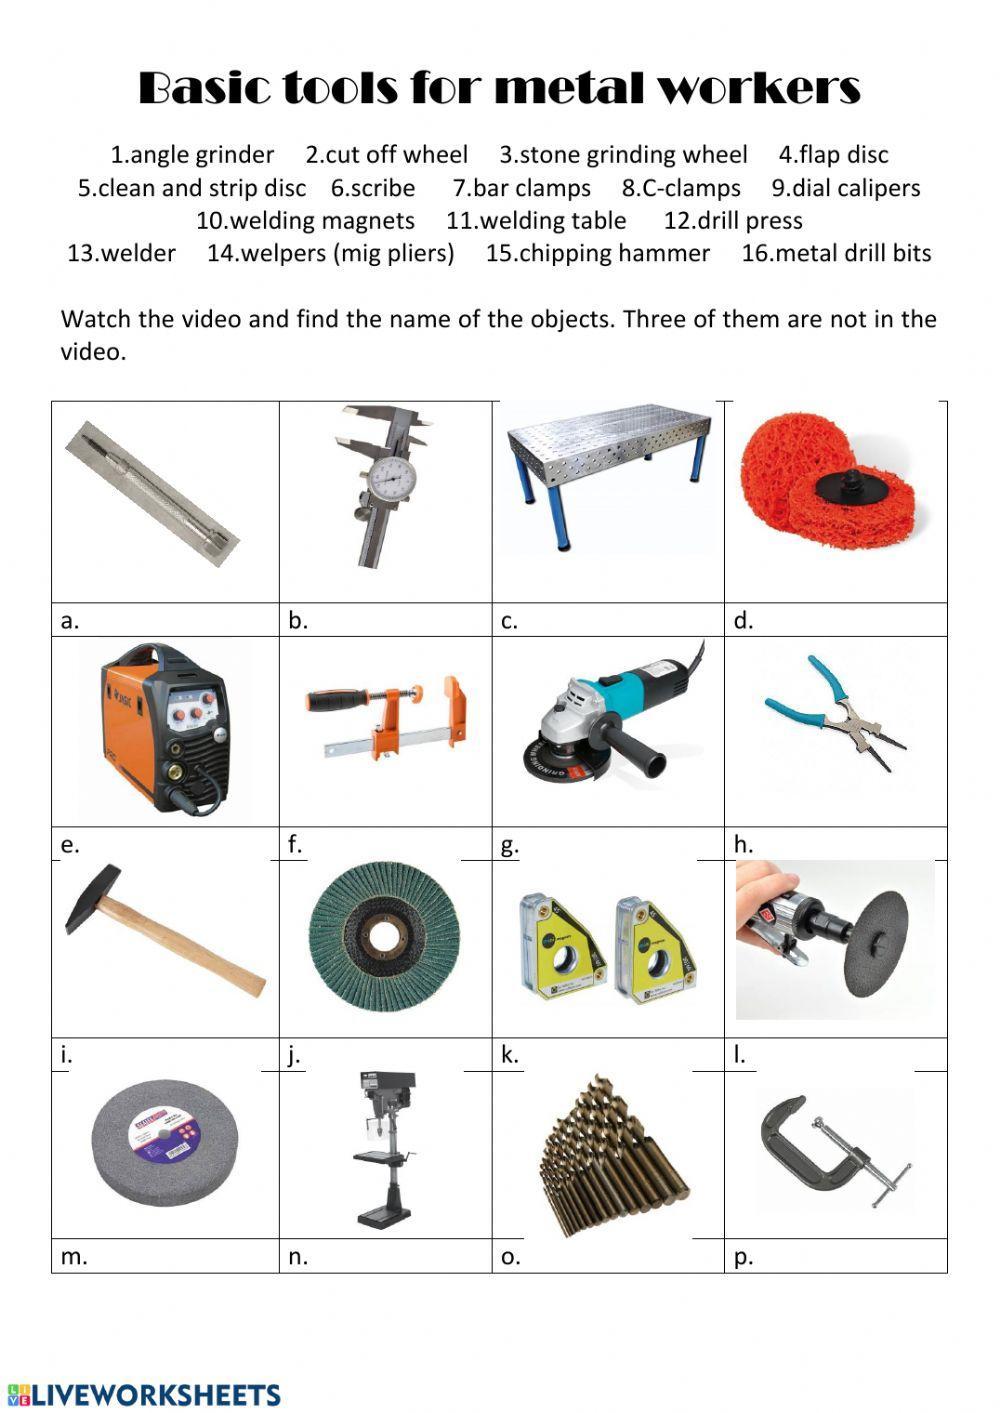 Tools for Metalworkers